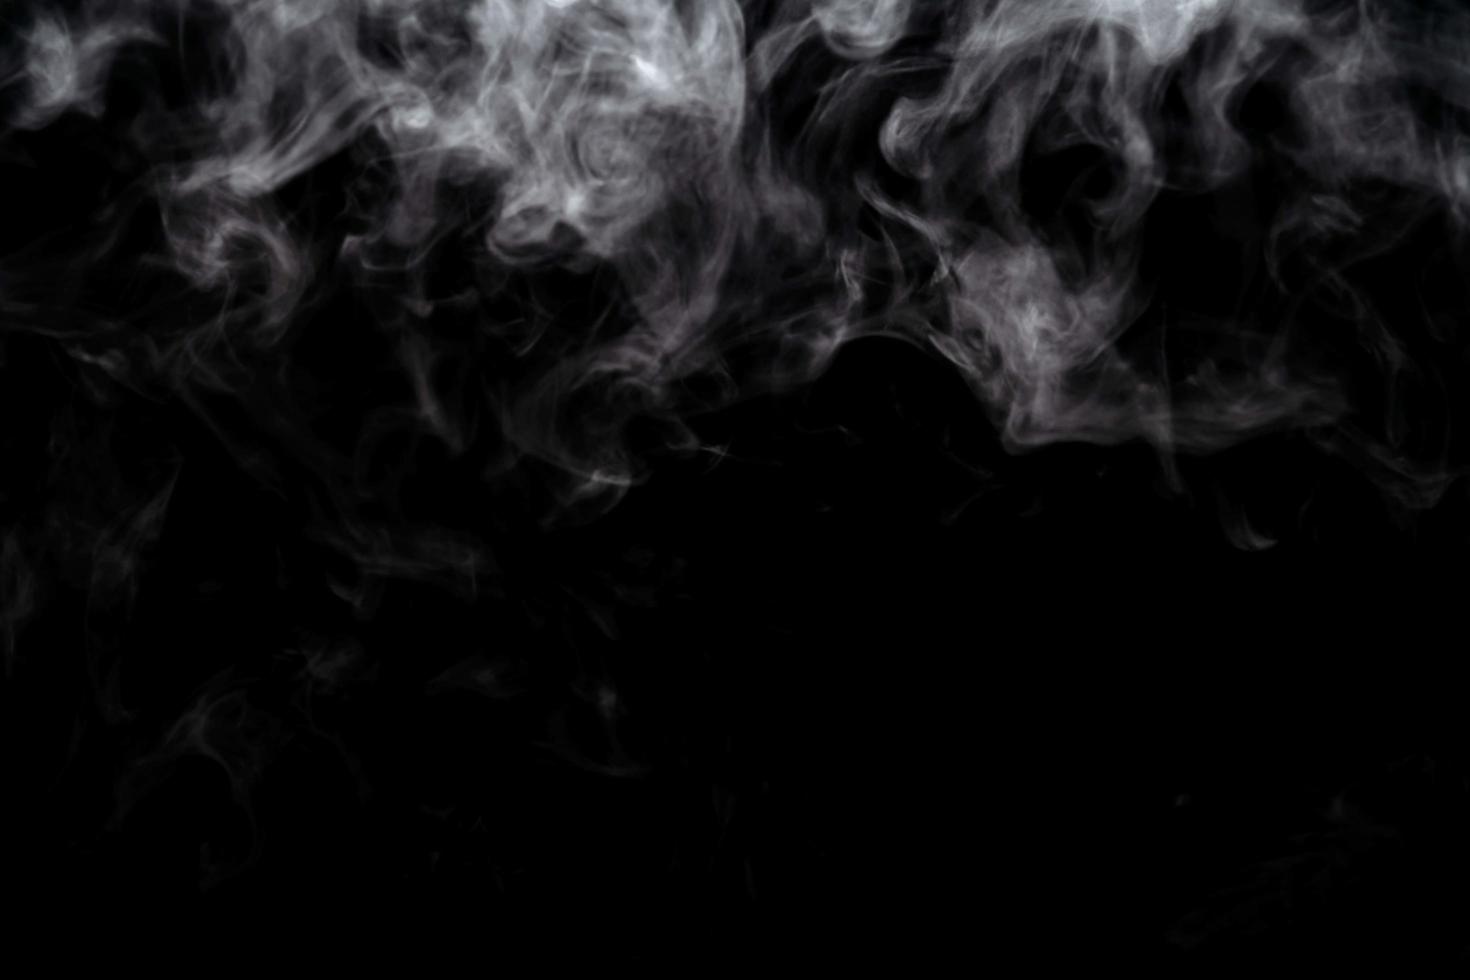 Abstract powder or smoke effect isolated on black background,Out of focus photo